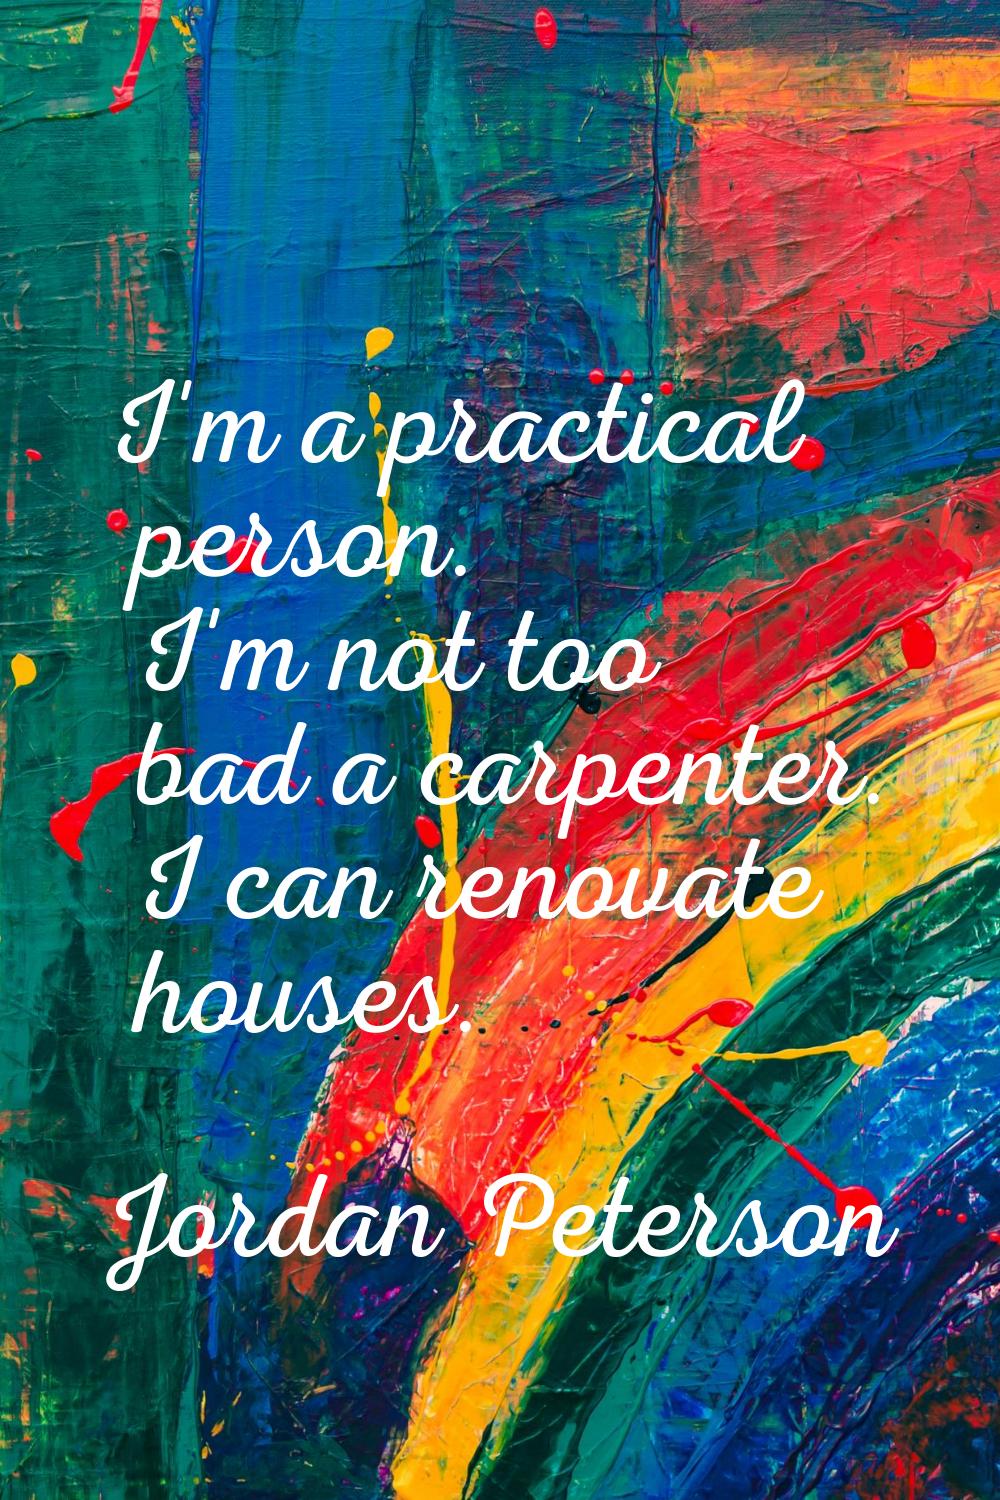 I'm a practical person. I'm not too bad a carpenter. I can renovate houses.